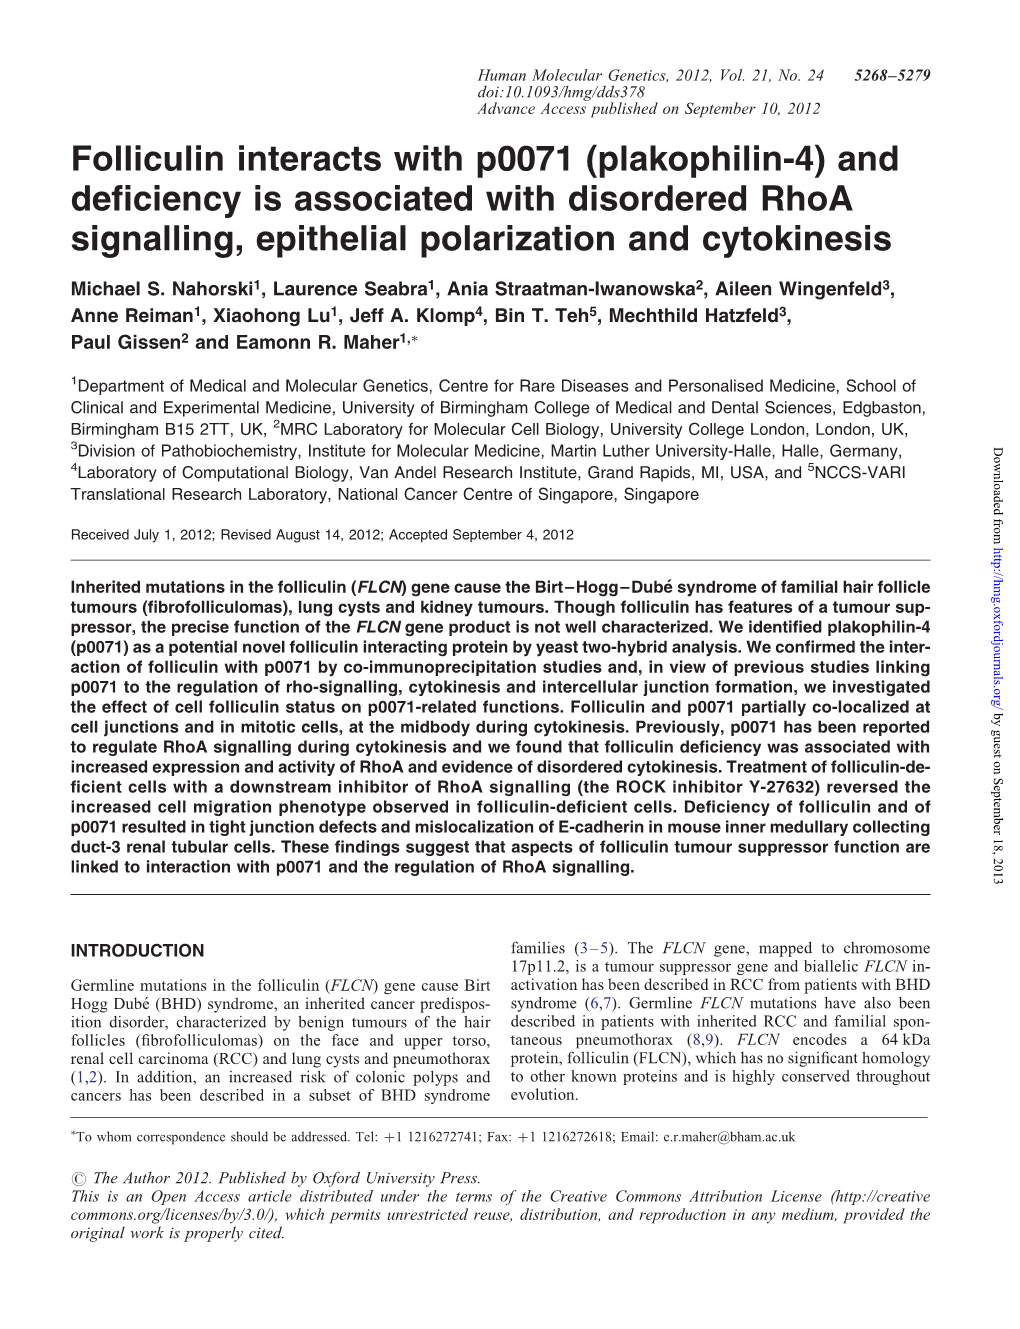 Folliculin Interacts with P0071 (Plakophilin-4) and Deficiency Is Associated with Disordered Rhoa Signalling, Epithelial Polariz